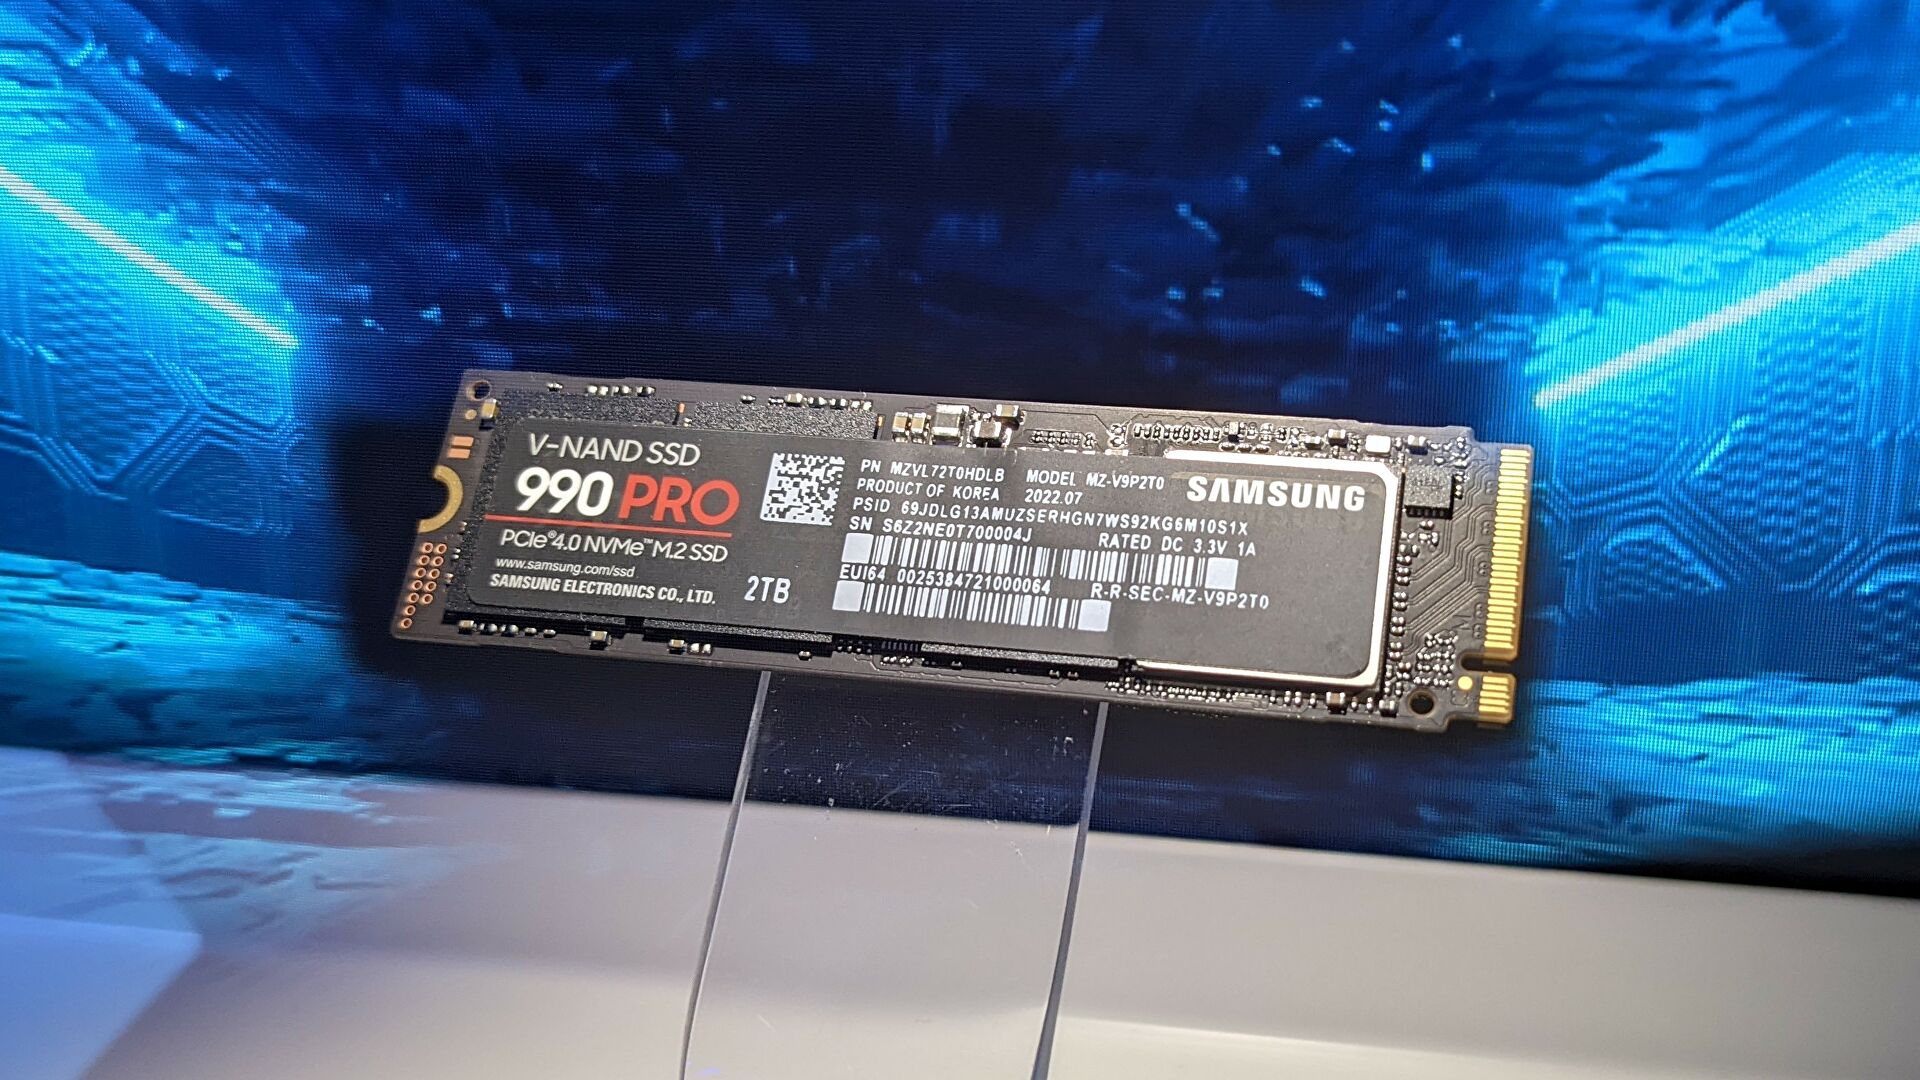 Samsung’s 990 Pro SSD promises fastest-ever PCIe 4.0 read speeds